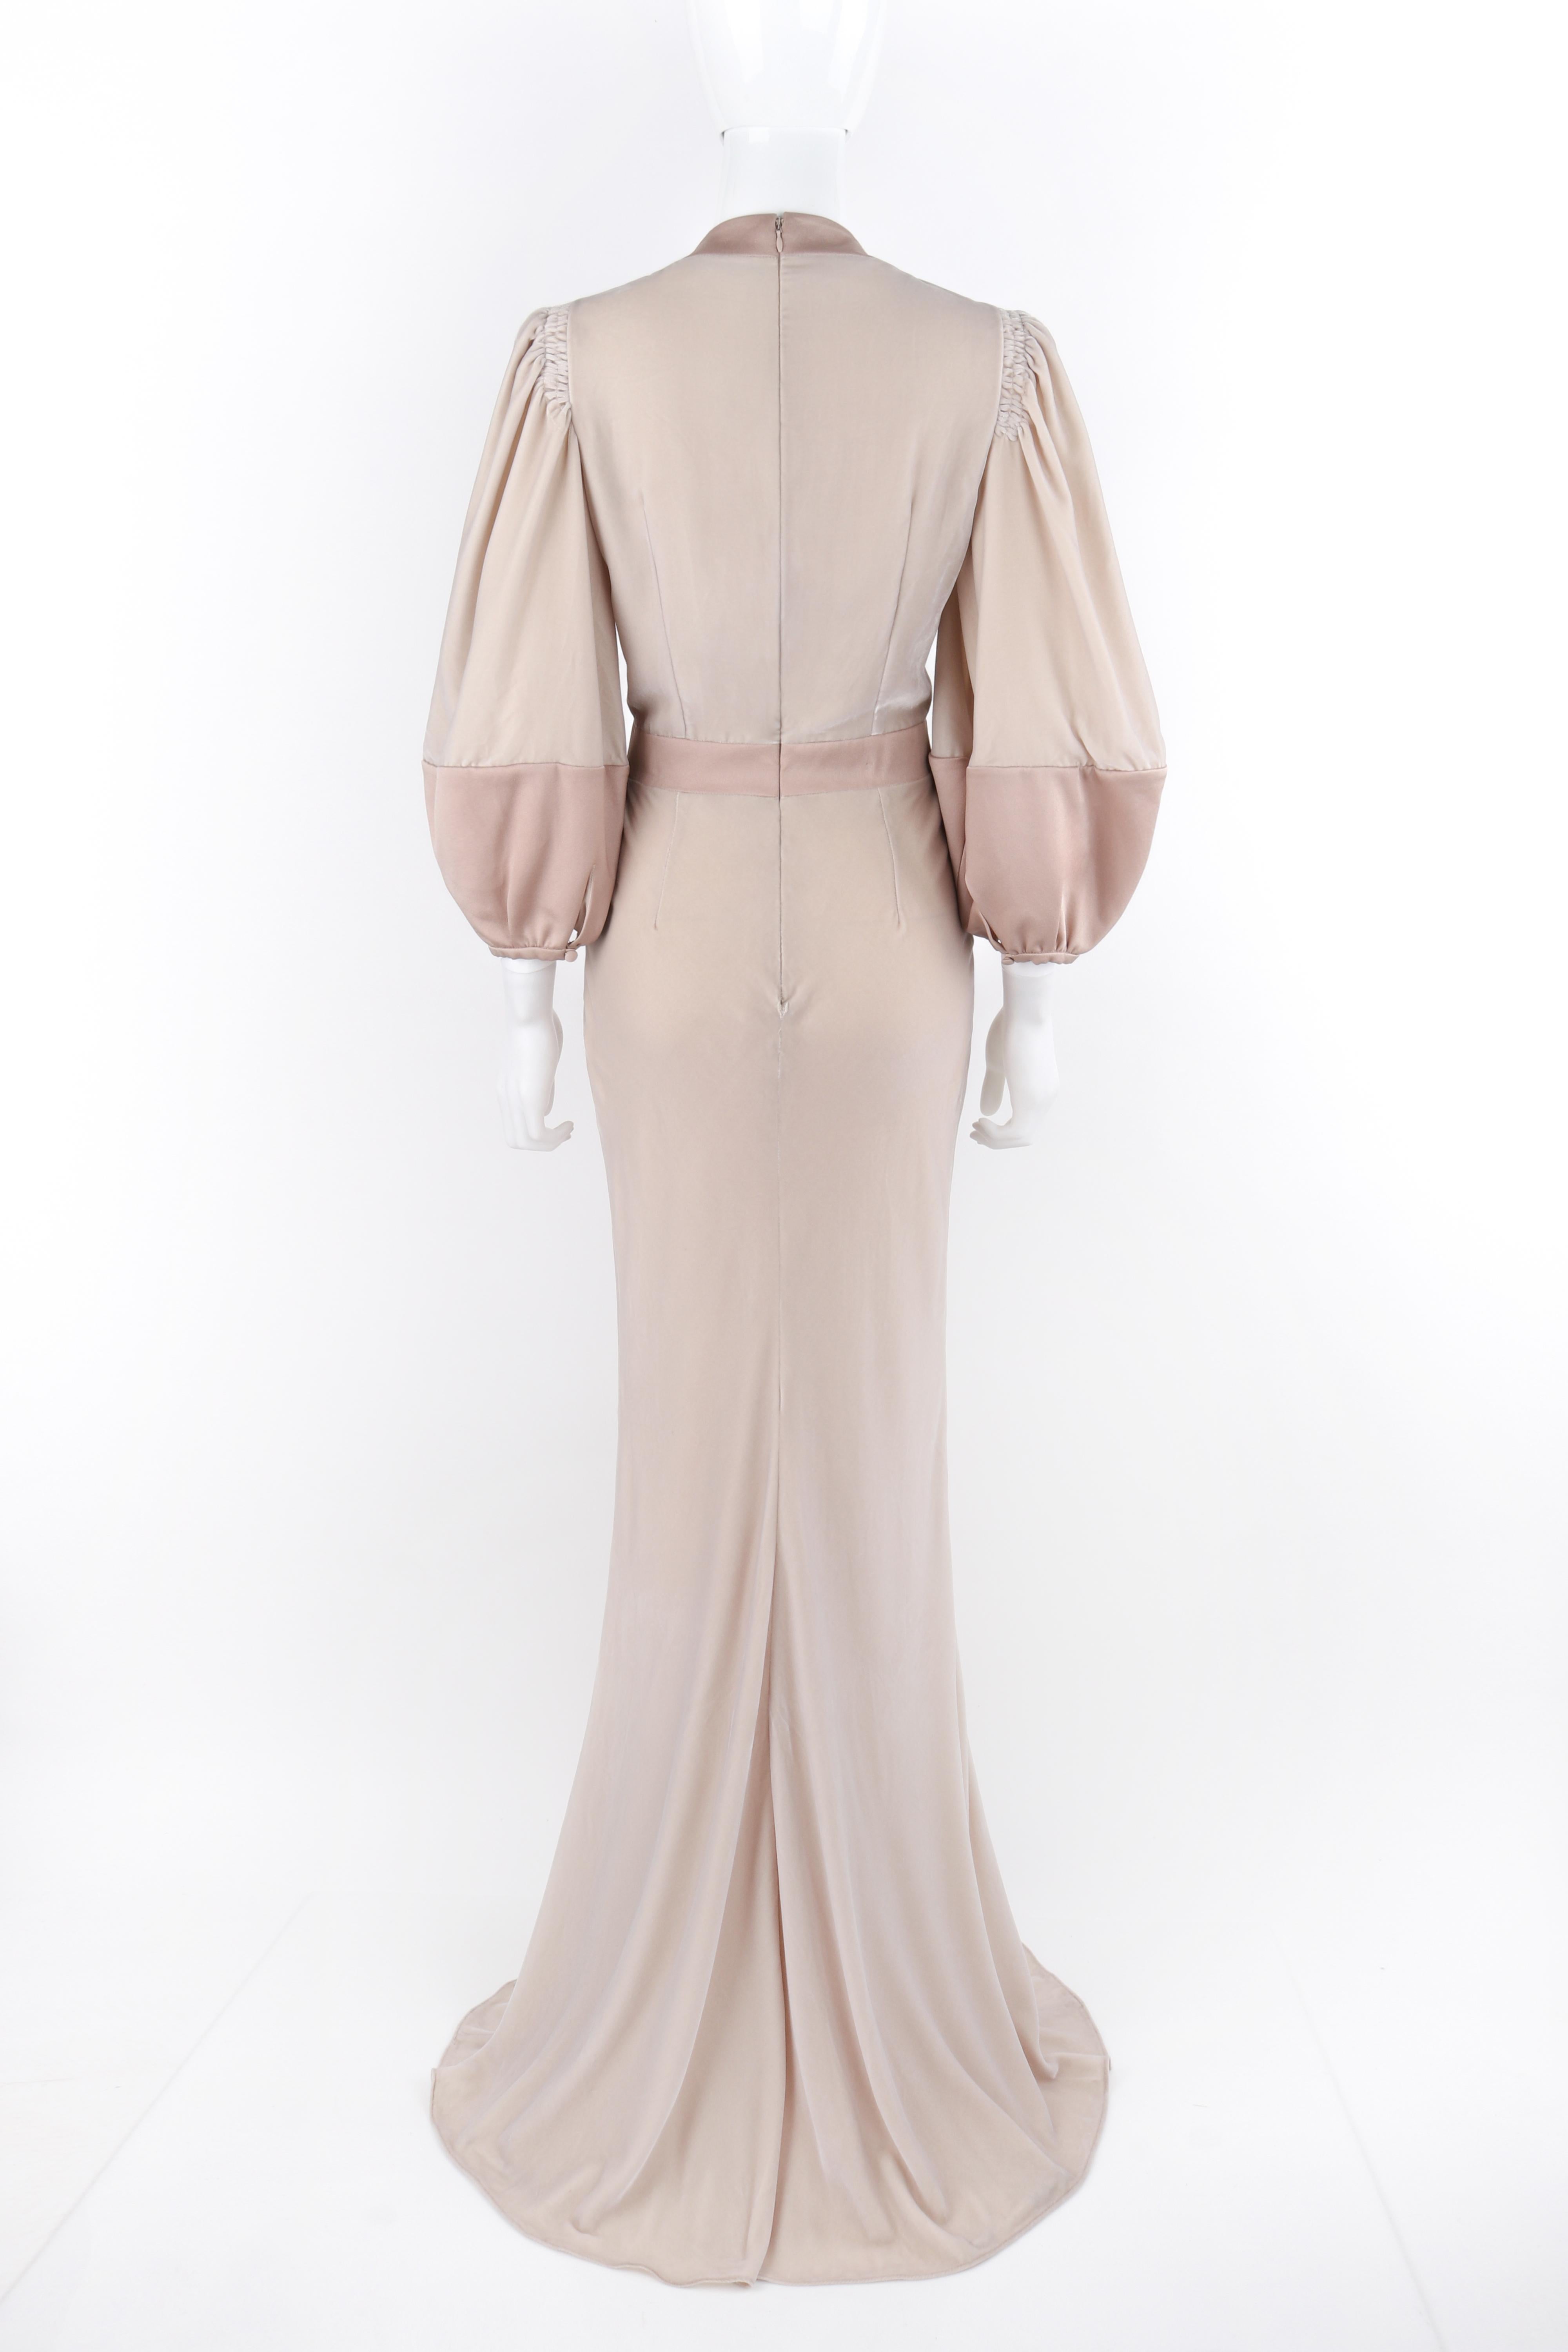 ALEXANDER McQUEEN c.2017 Dusty Mauve Velvet Silk V-Neck Puff Longsleeve Gown In Good Condition For Sale In Thiensville, WI